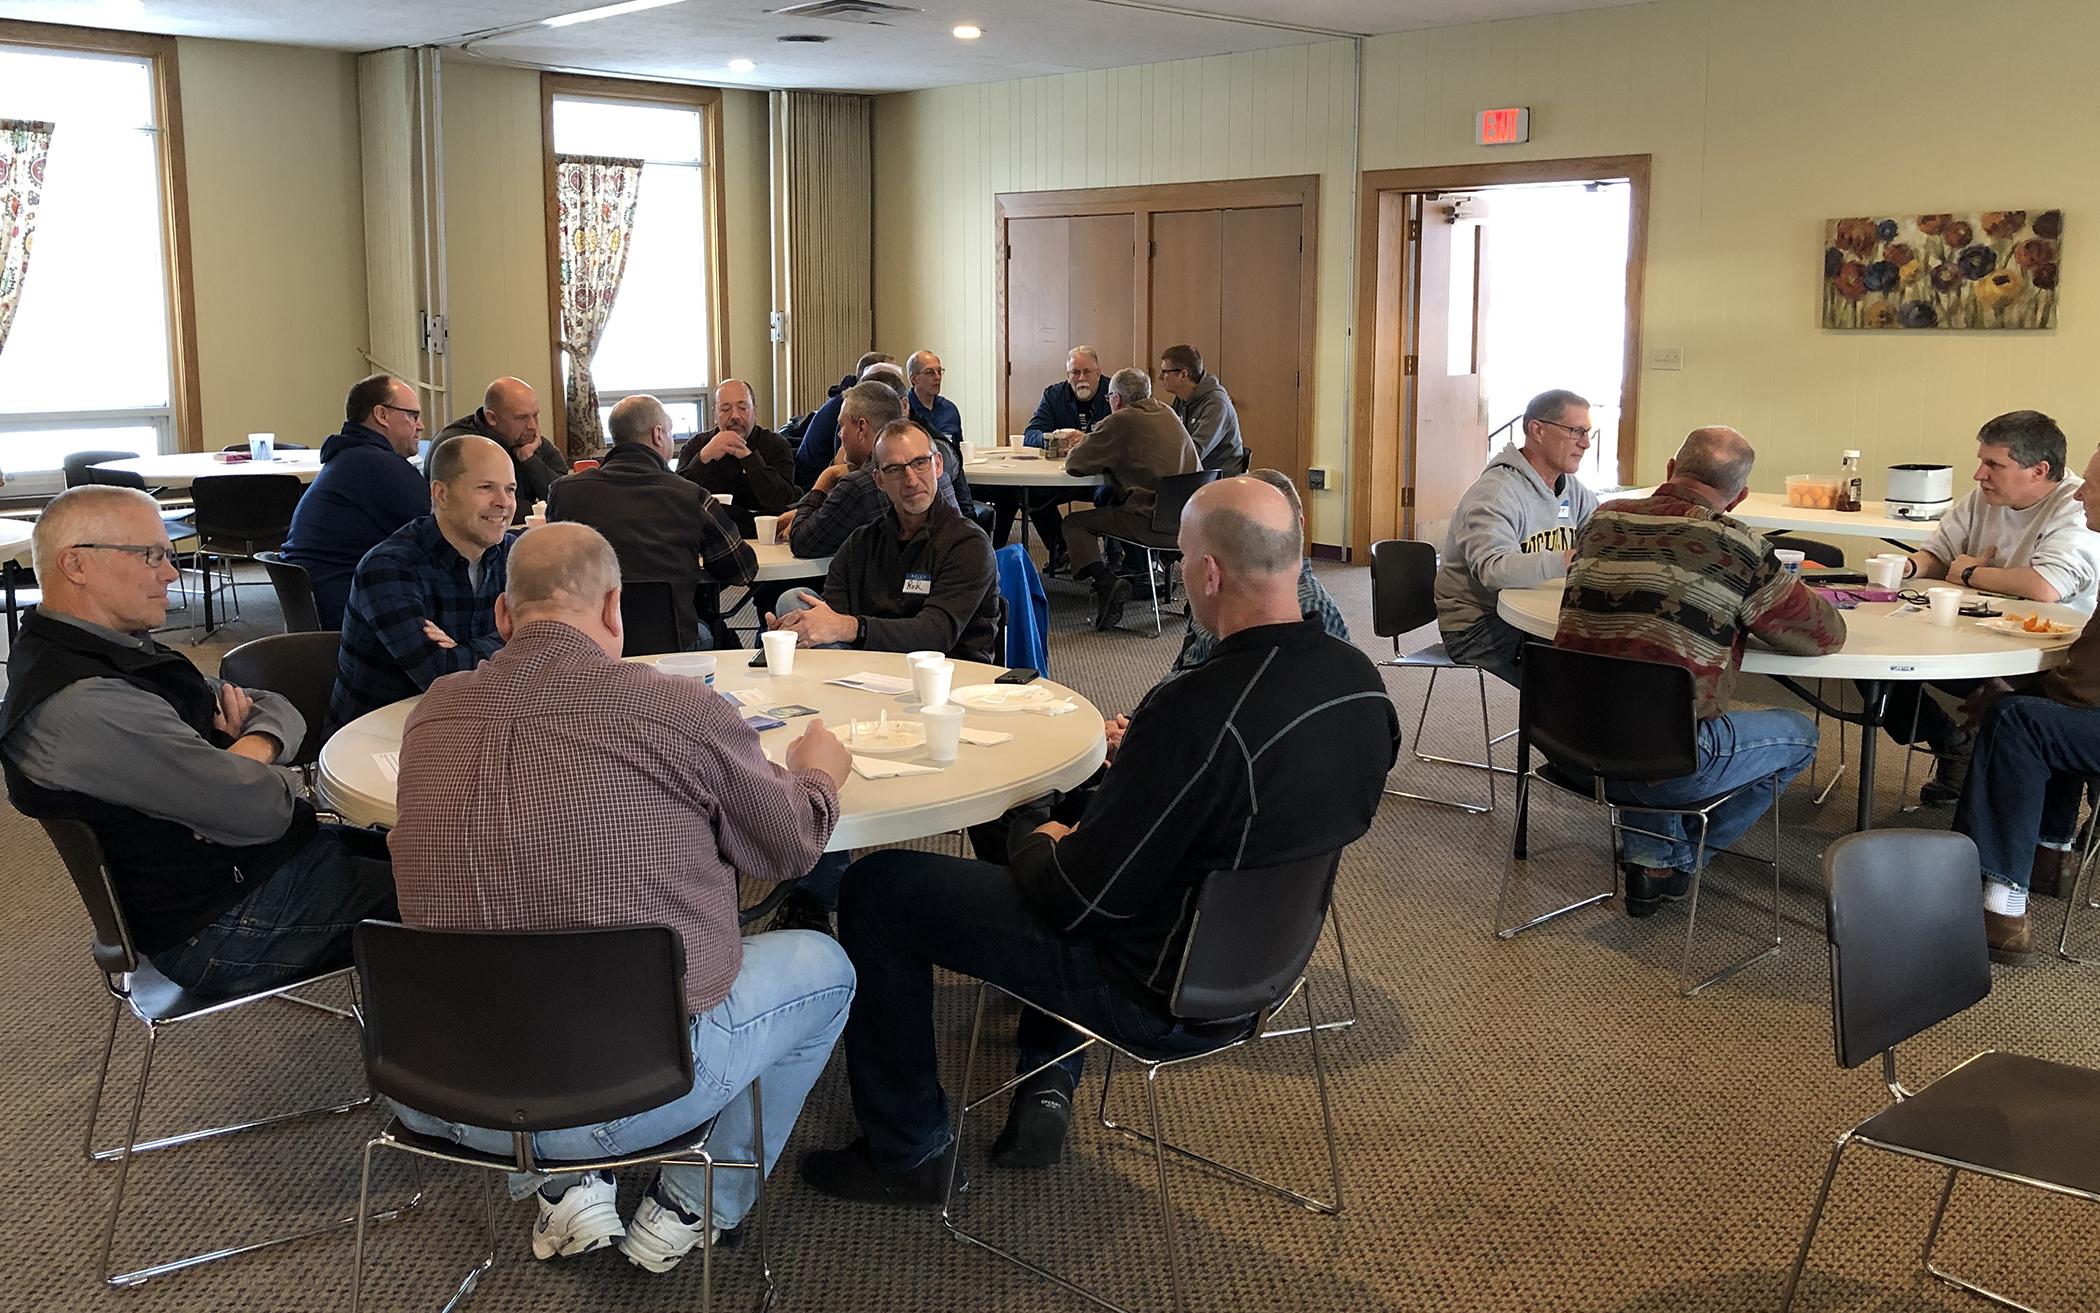 Focus on Scripture, Discipleship Builds Leaders in Hudsonville, Mich.